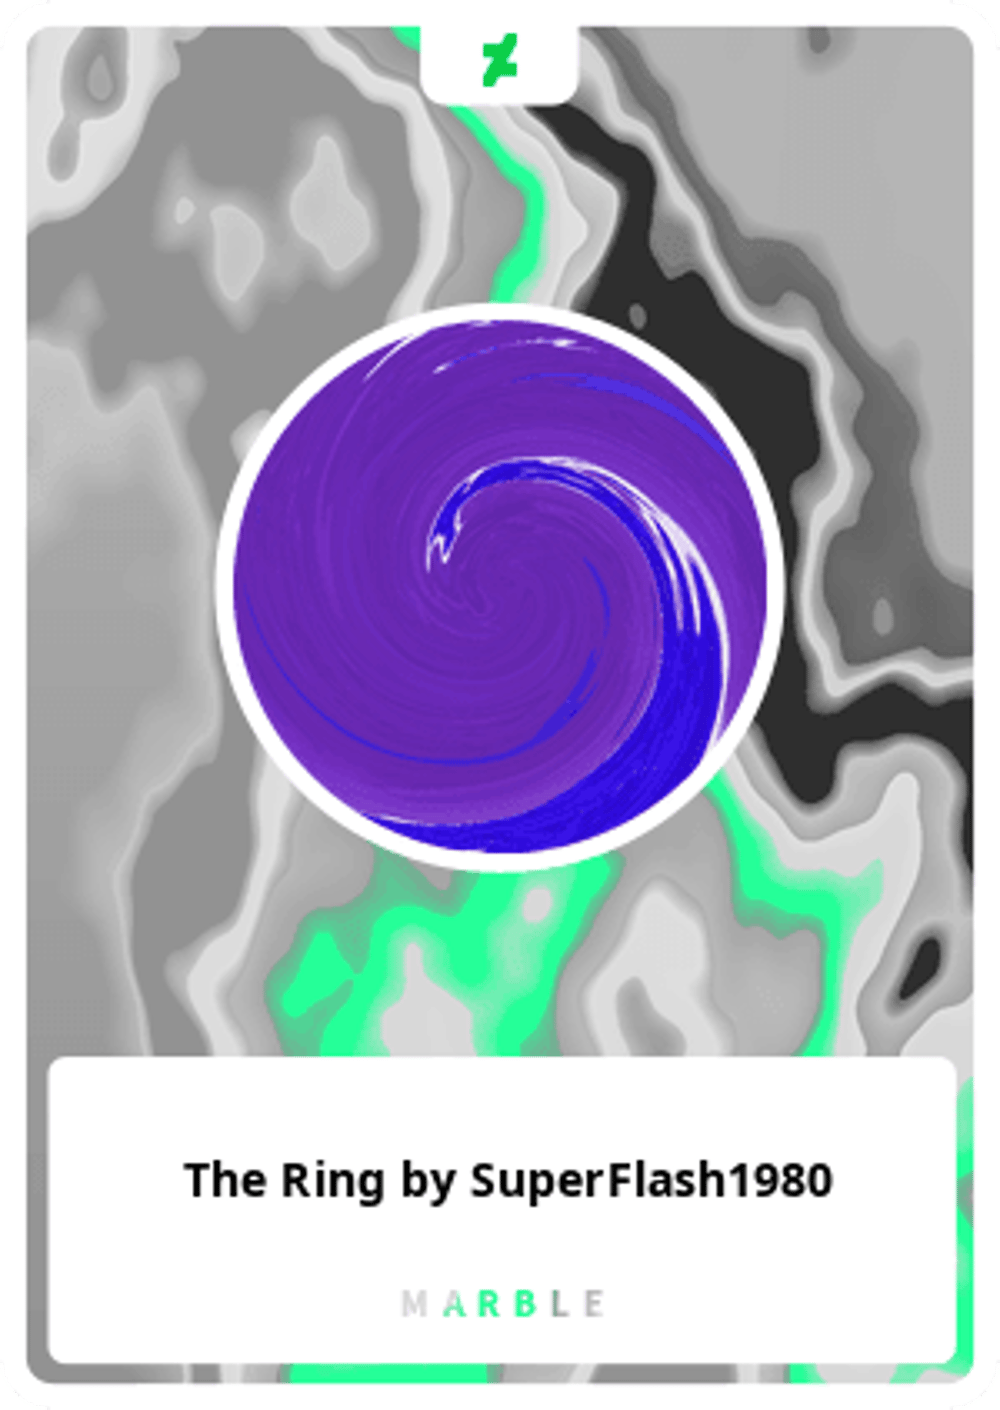 The Ring by SuperFlash1980